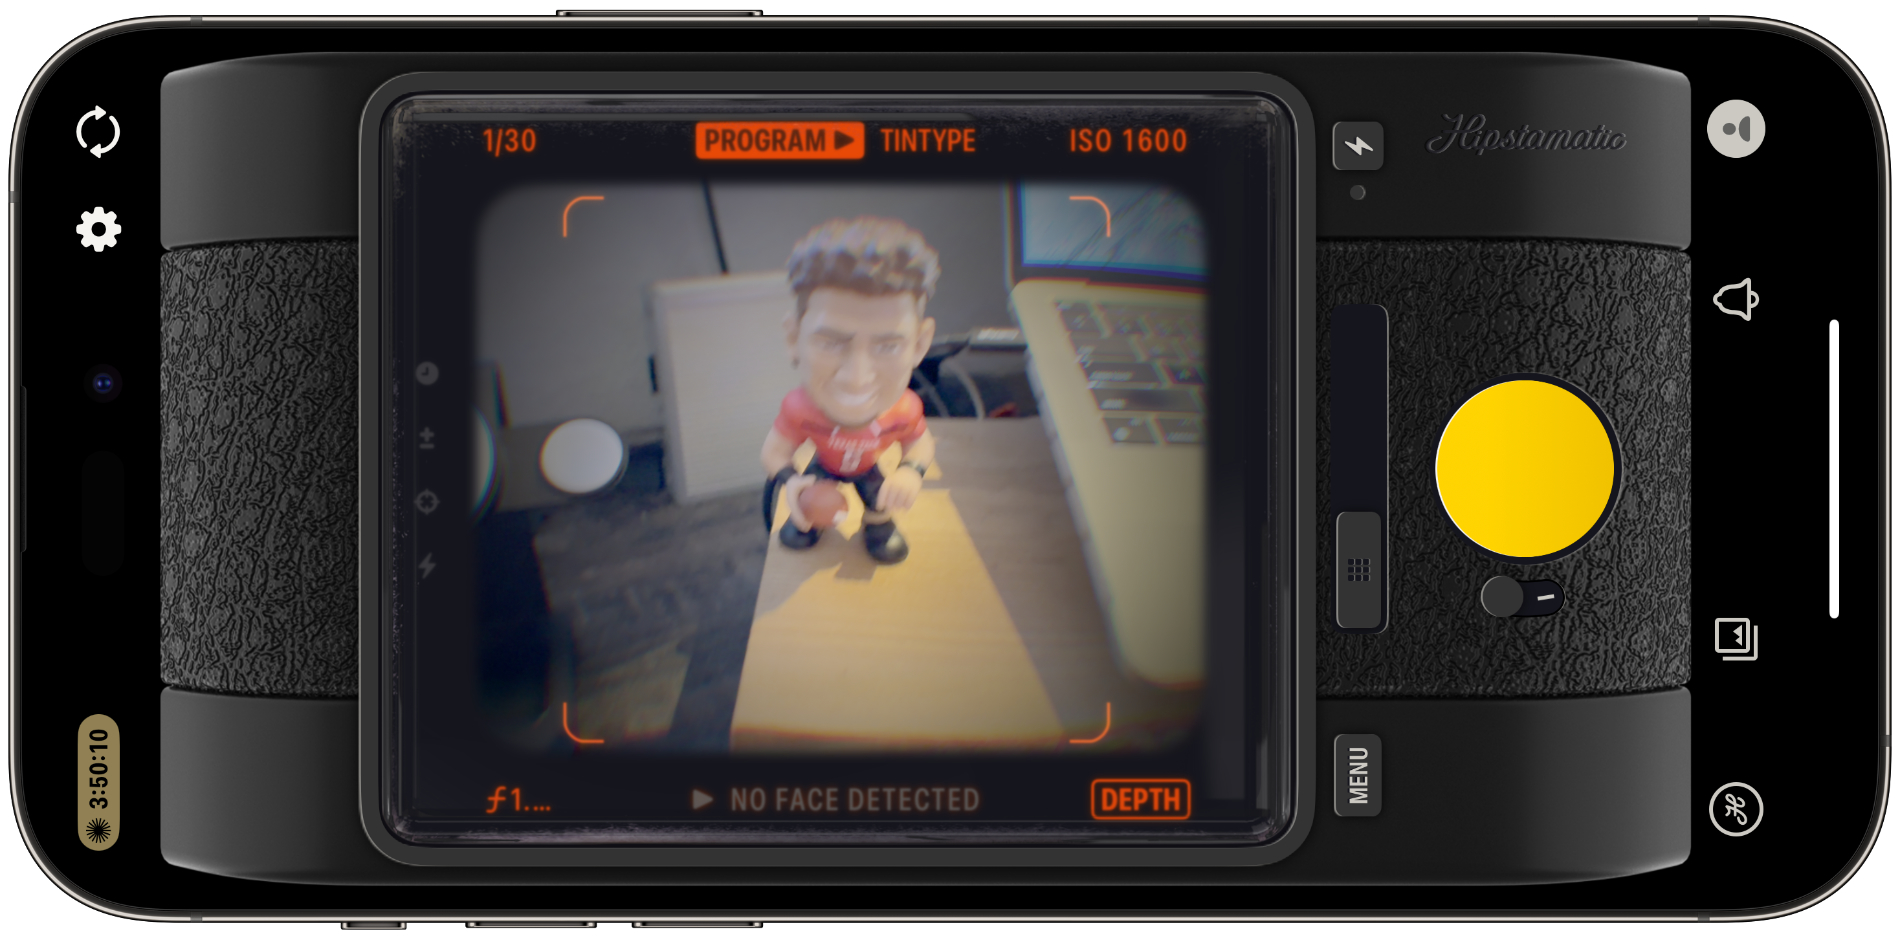 Retro Camera App Hipstamatic Gets Makeover With New Analog Experience